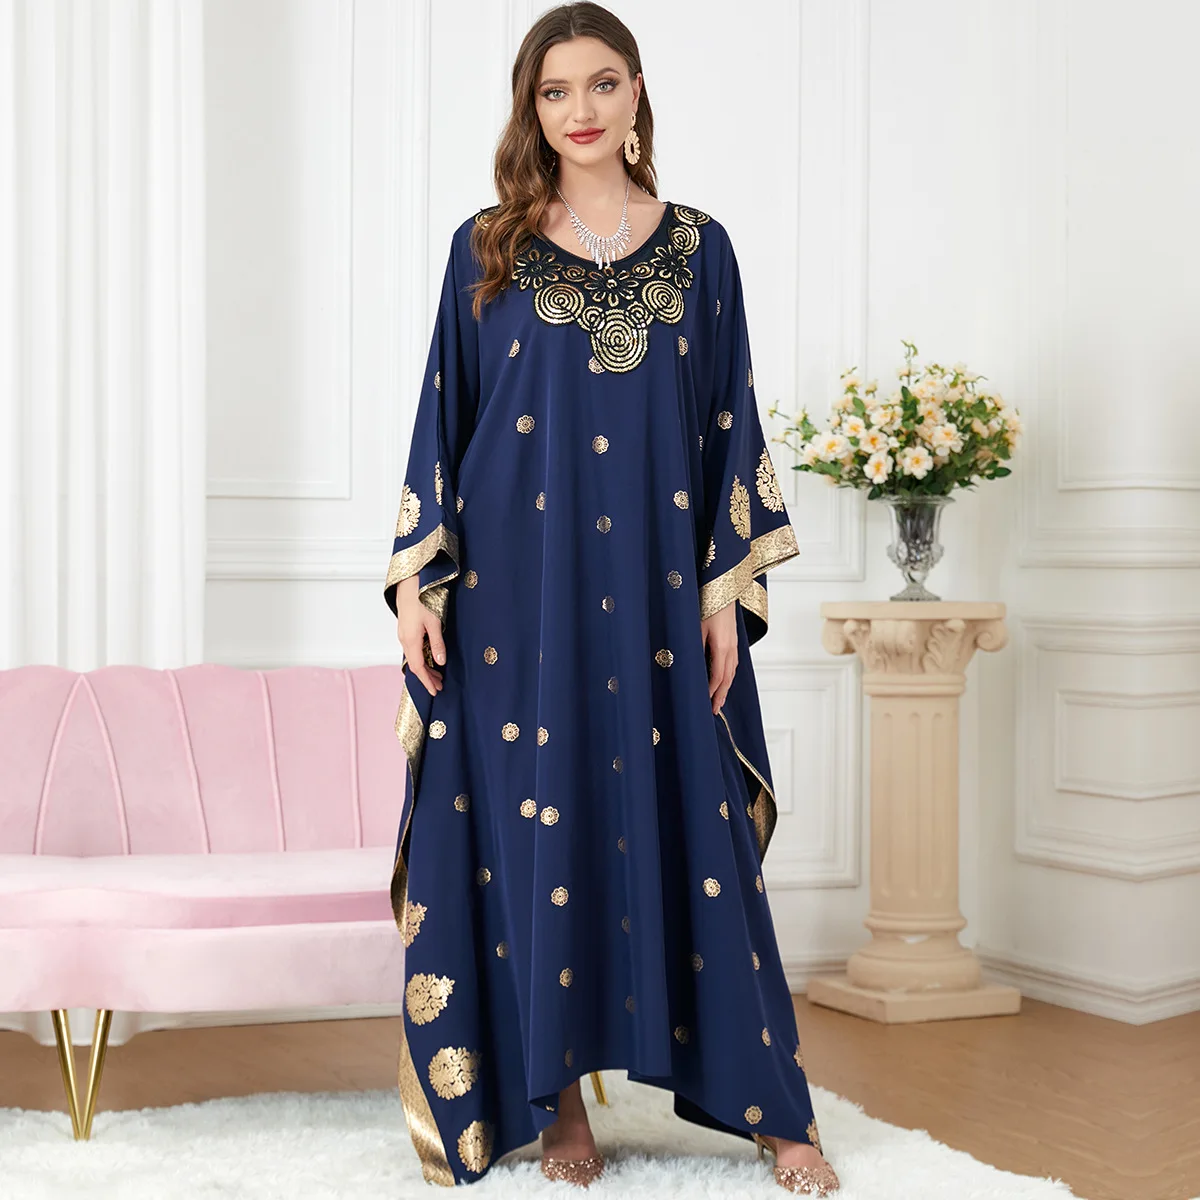 Muslim Blue Dress One Size Women's Fashion Gold Stamped Printing Autumn Bat Sleeve Loose Casual Dress Long Skirt Clothing